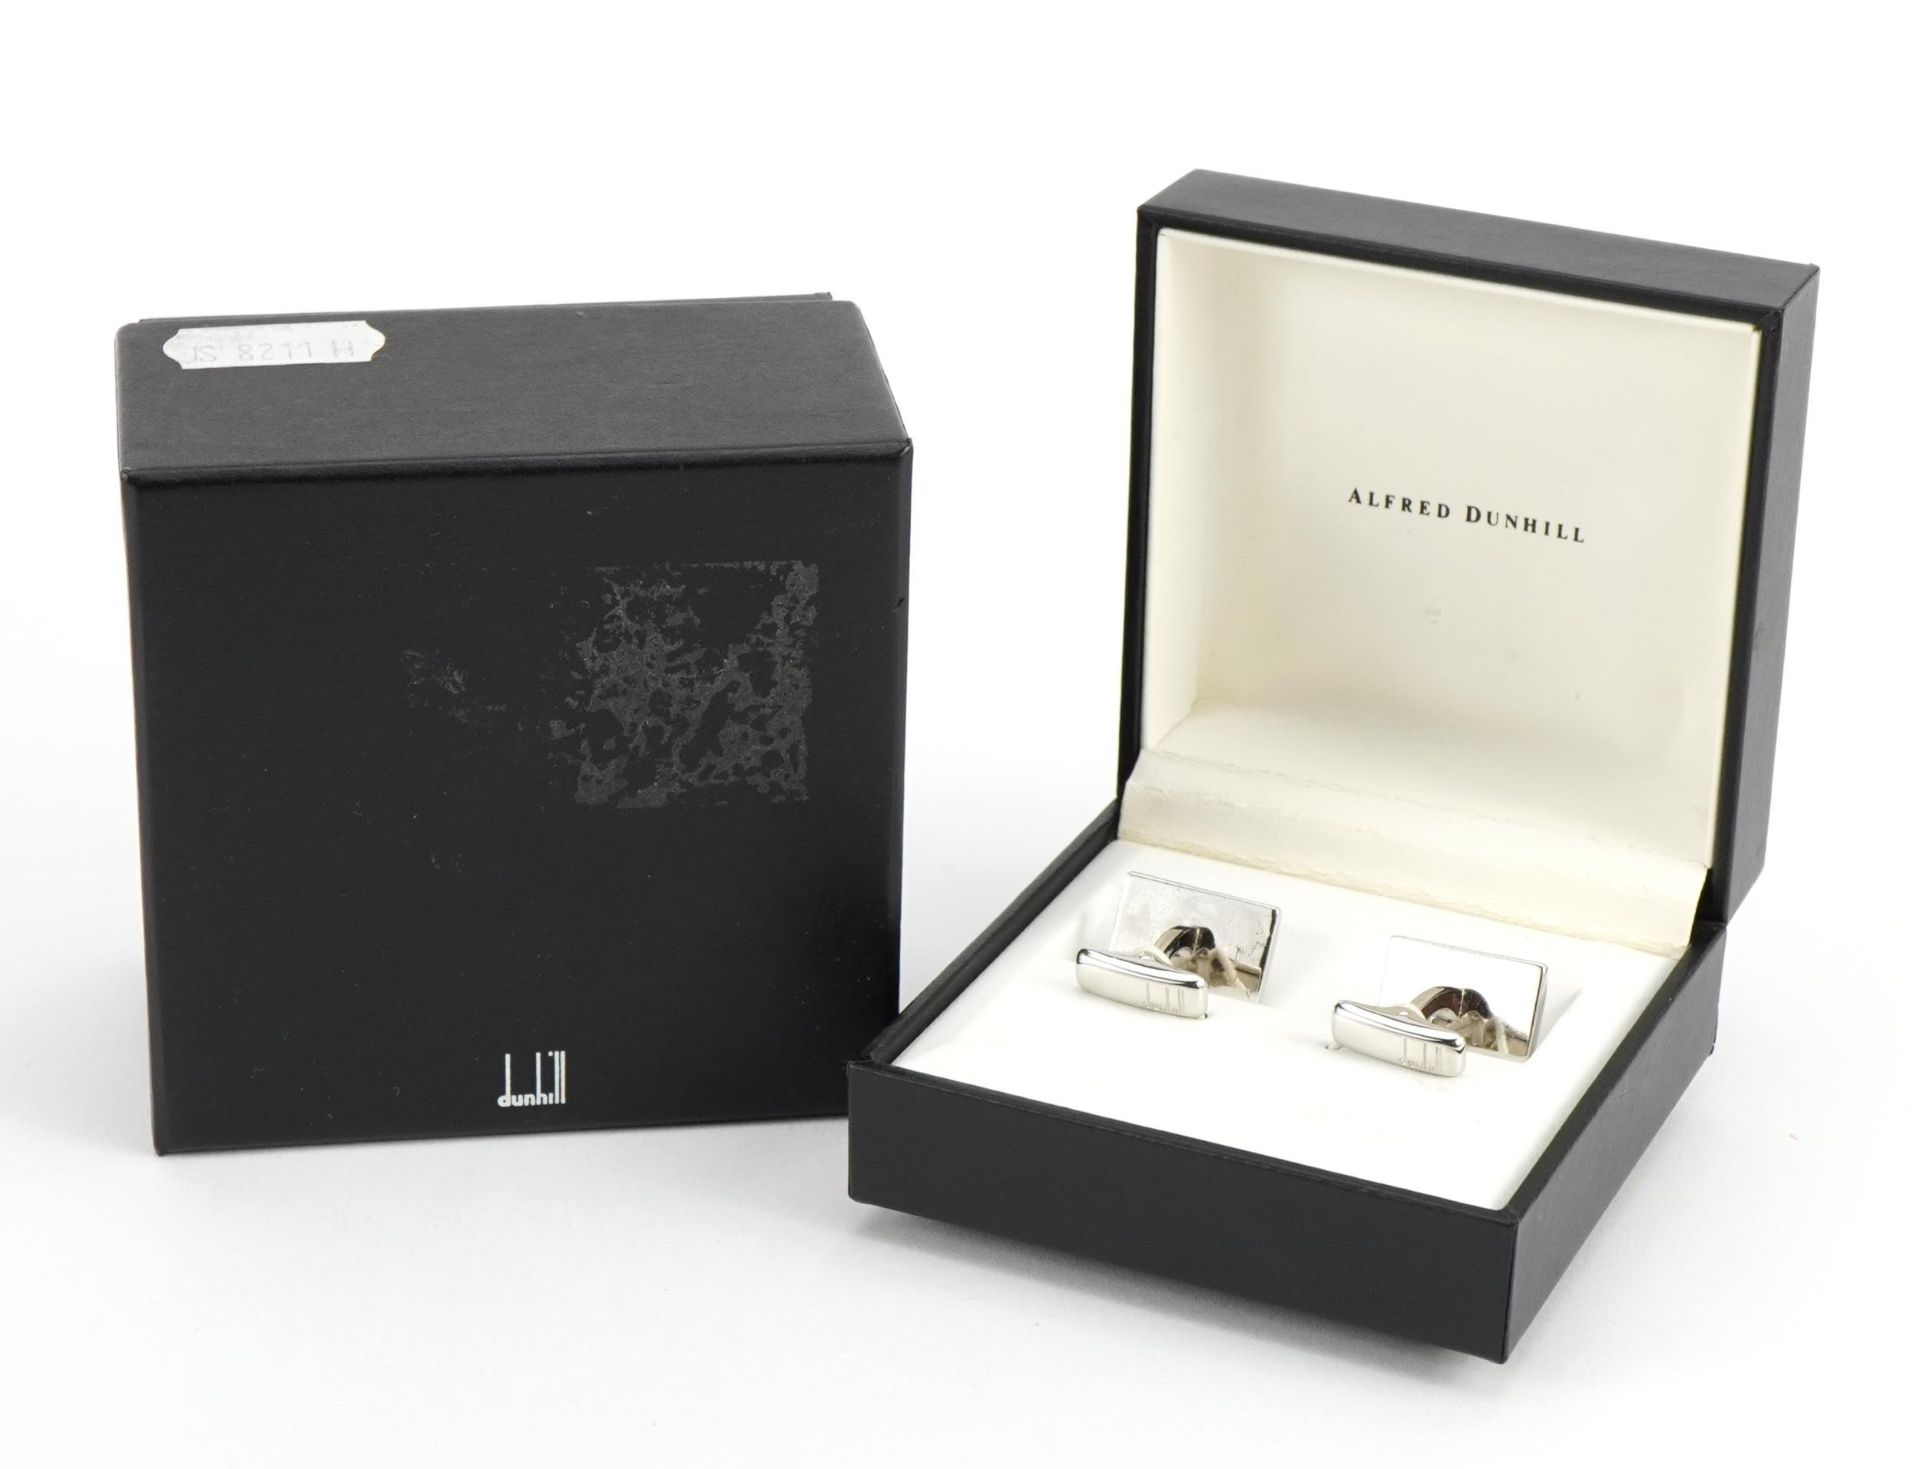 Alfred Dunhill, pair of steel cufflinks with Alfred Dunhill box, 1.9cm wide